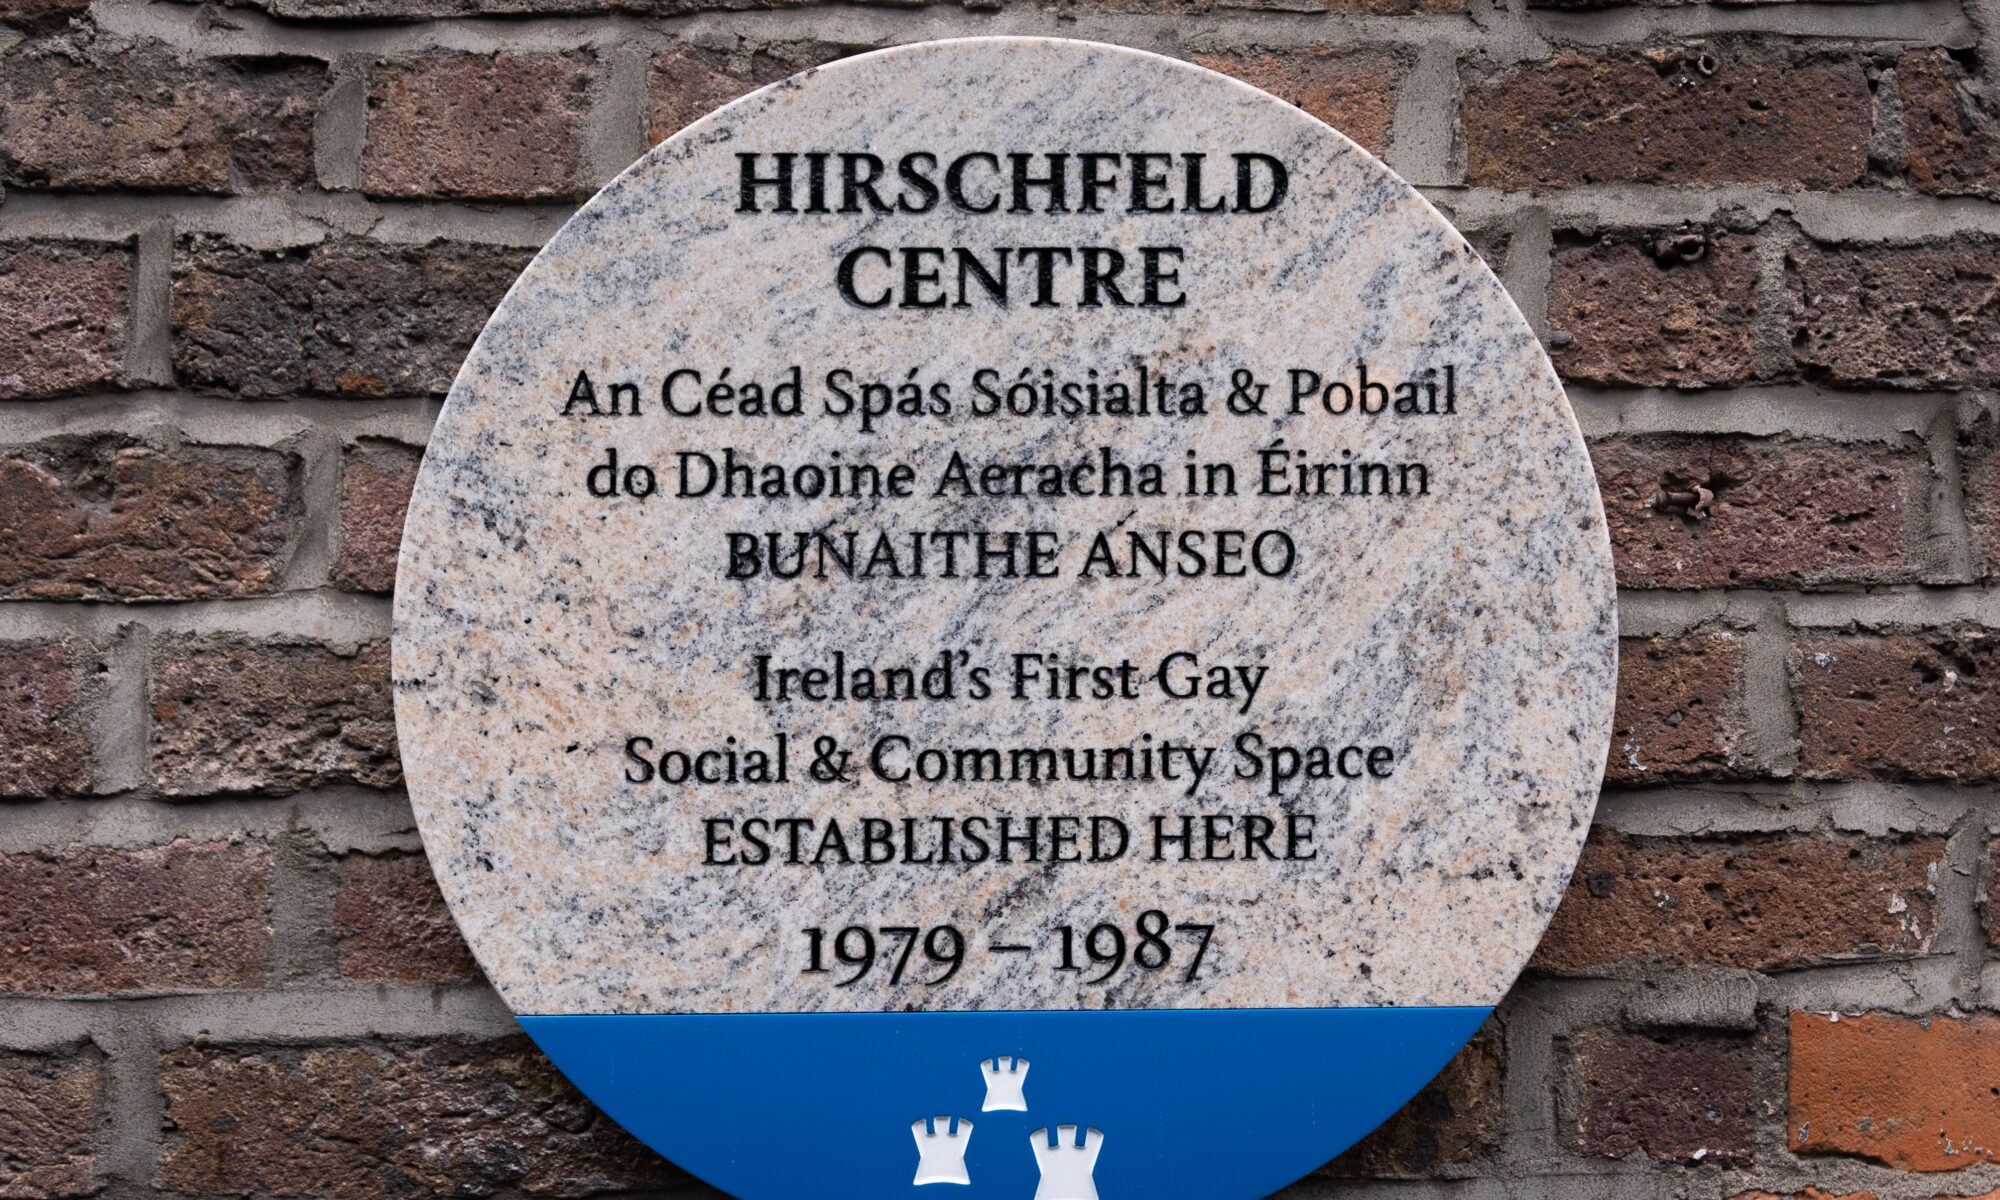 Photograph of a plaque commemorating the Hirschfeld Centre in Temple Bar, Dublin.